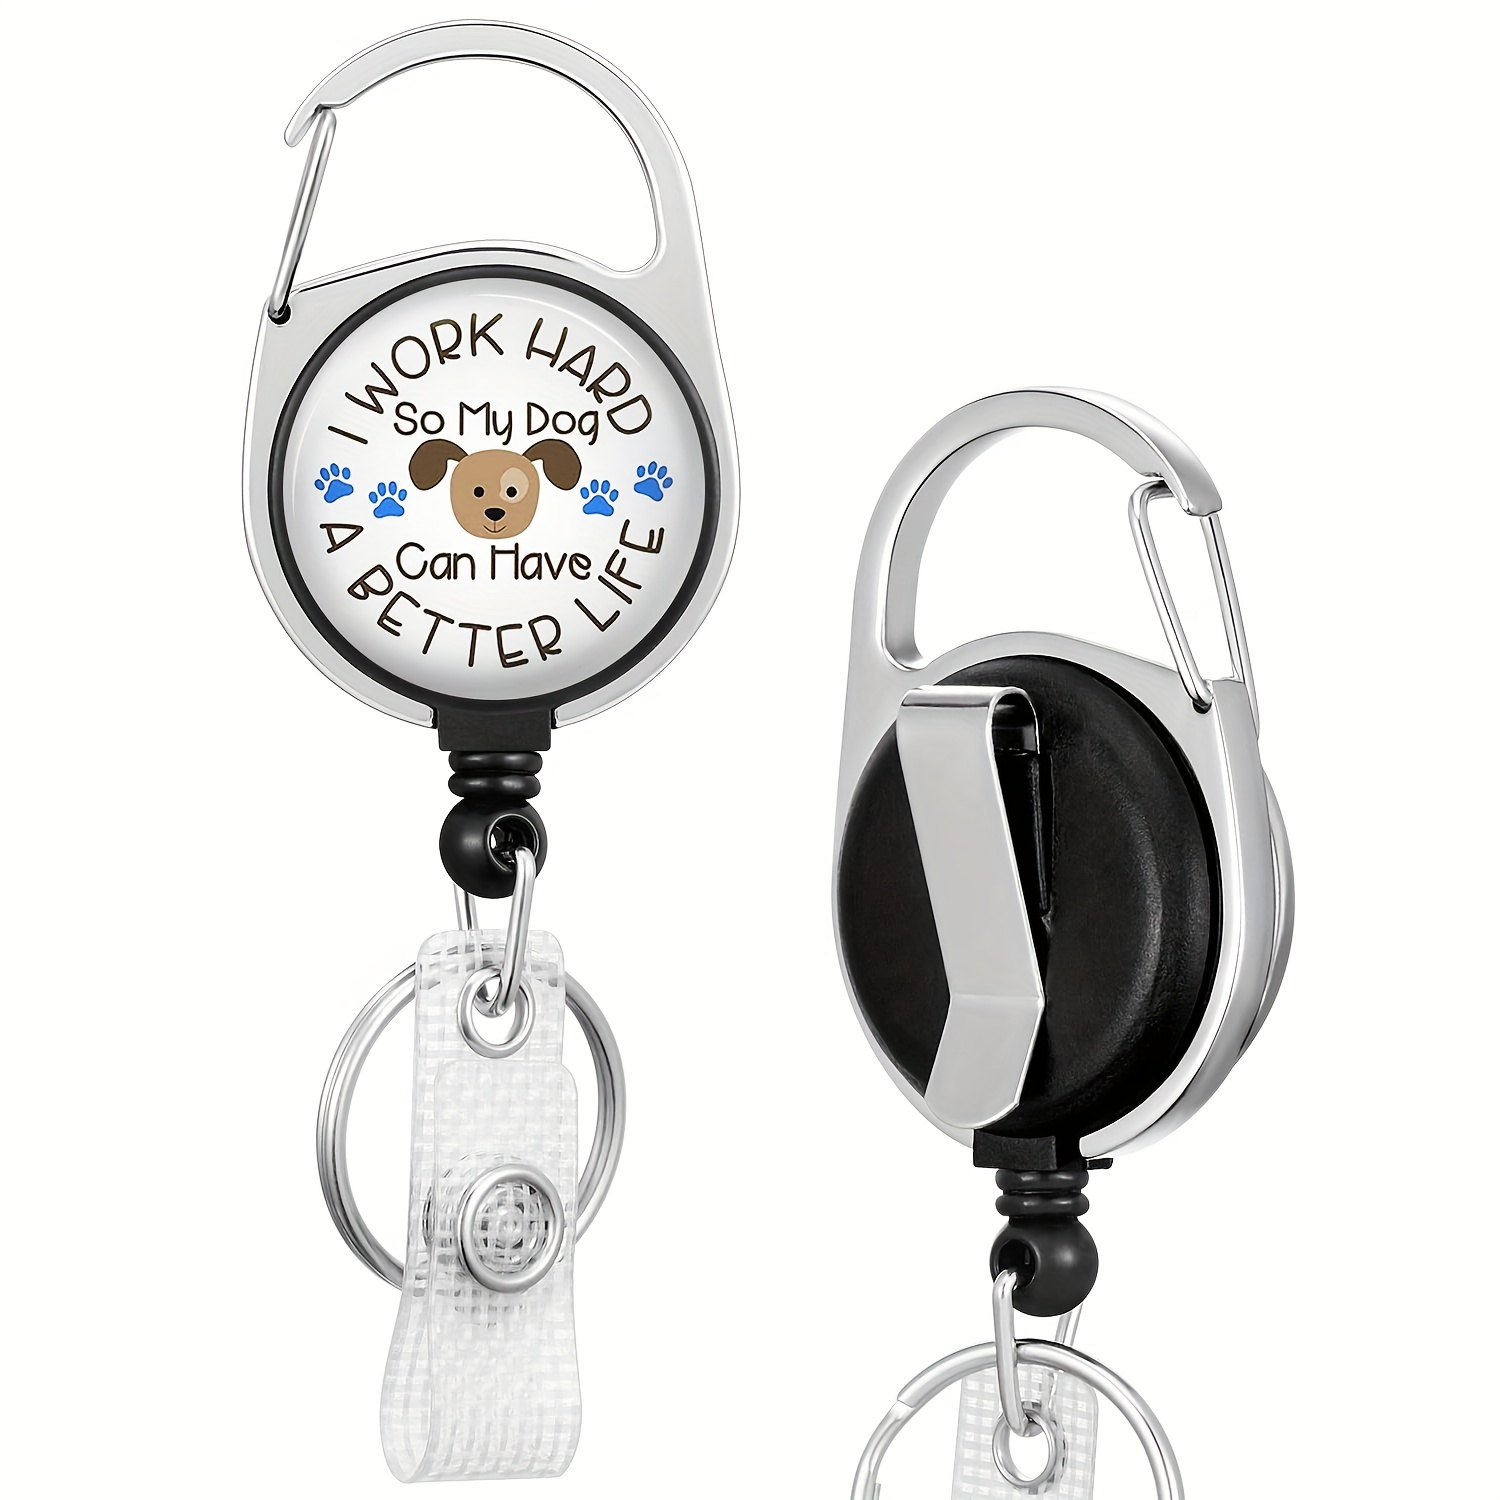 Jupswan Badge Reels Holder Retractable with ID Clip for Nurse Name Tag Card RN LPN CNA Hilarious Nursing Doctor Teacher Student Medical Work Office